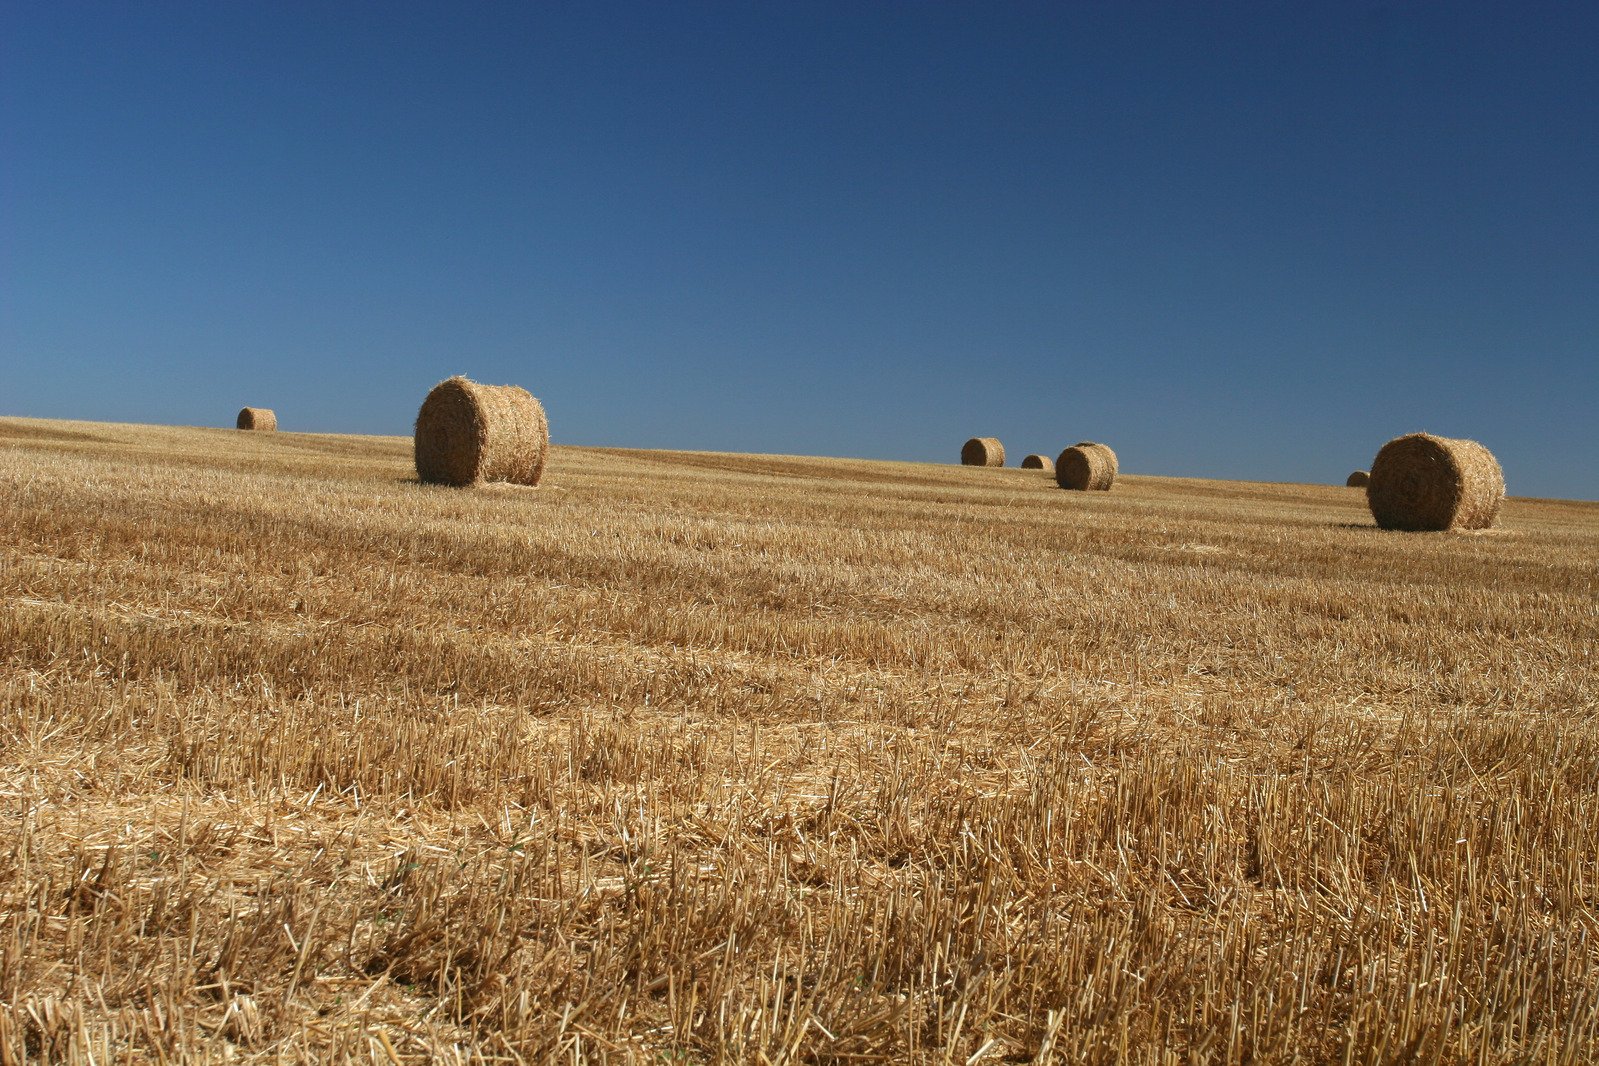 large round bales sitting on a dry, desolate field